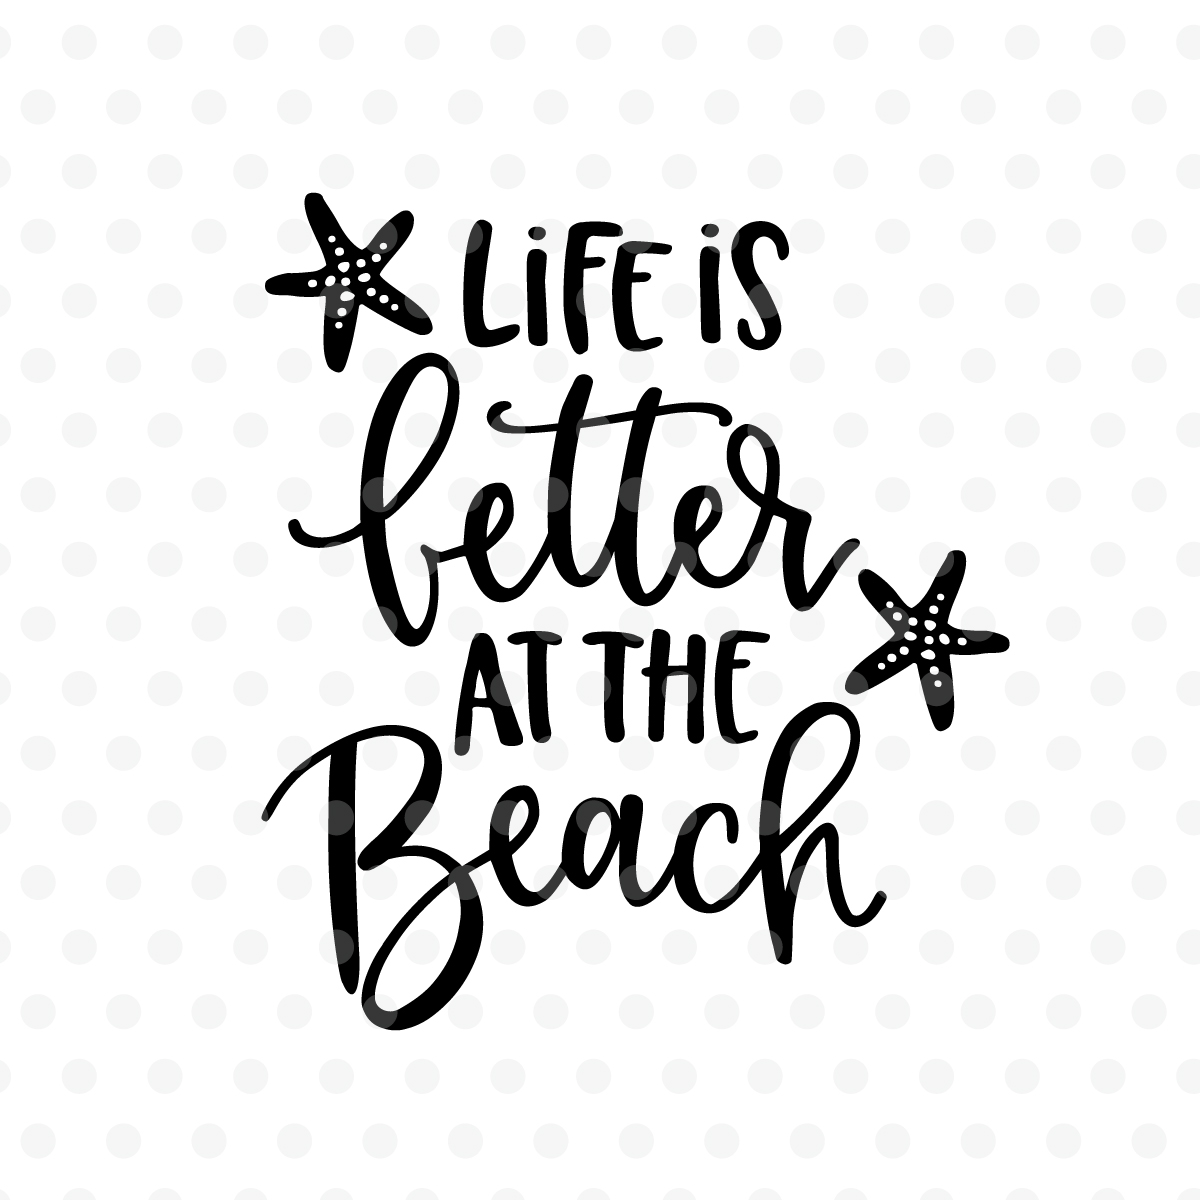 Download Life is better at the Beach SVG, EPS, P | Design Bundles